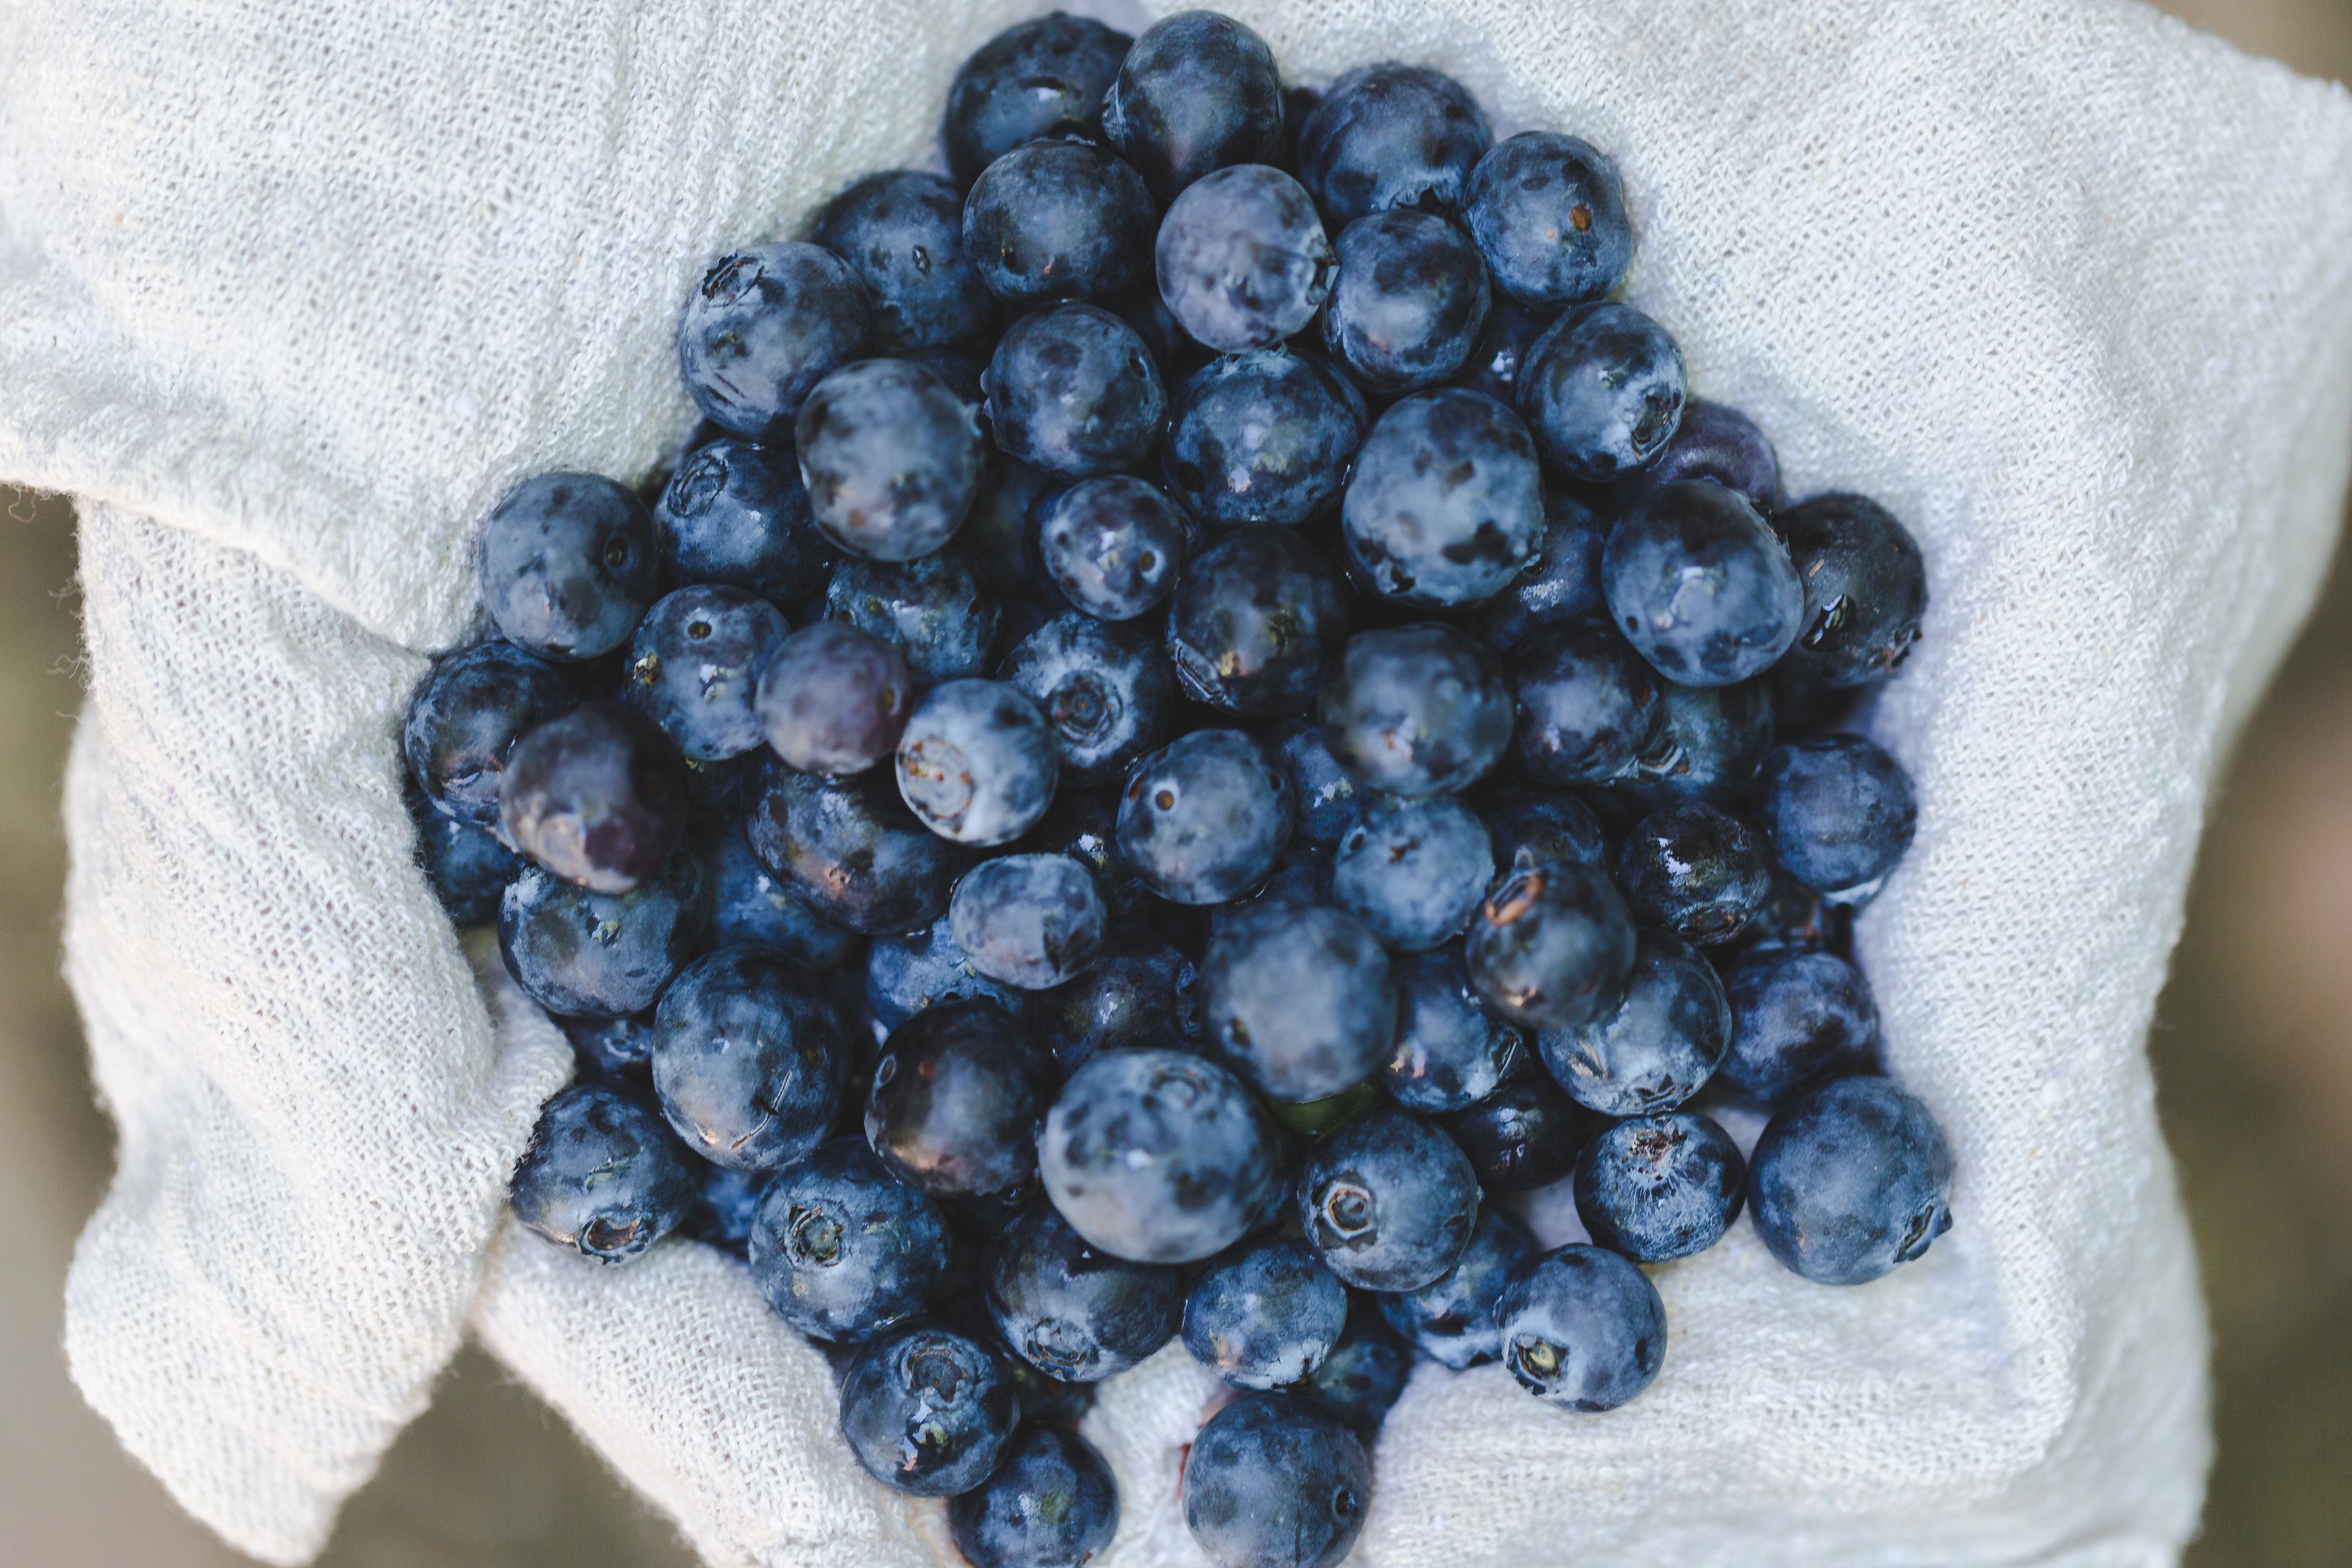 Blueberries on linen - o2 living recipe - makers of organic cold-pressed fruit and vegetable Living Juices